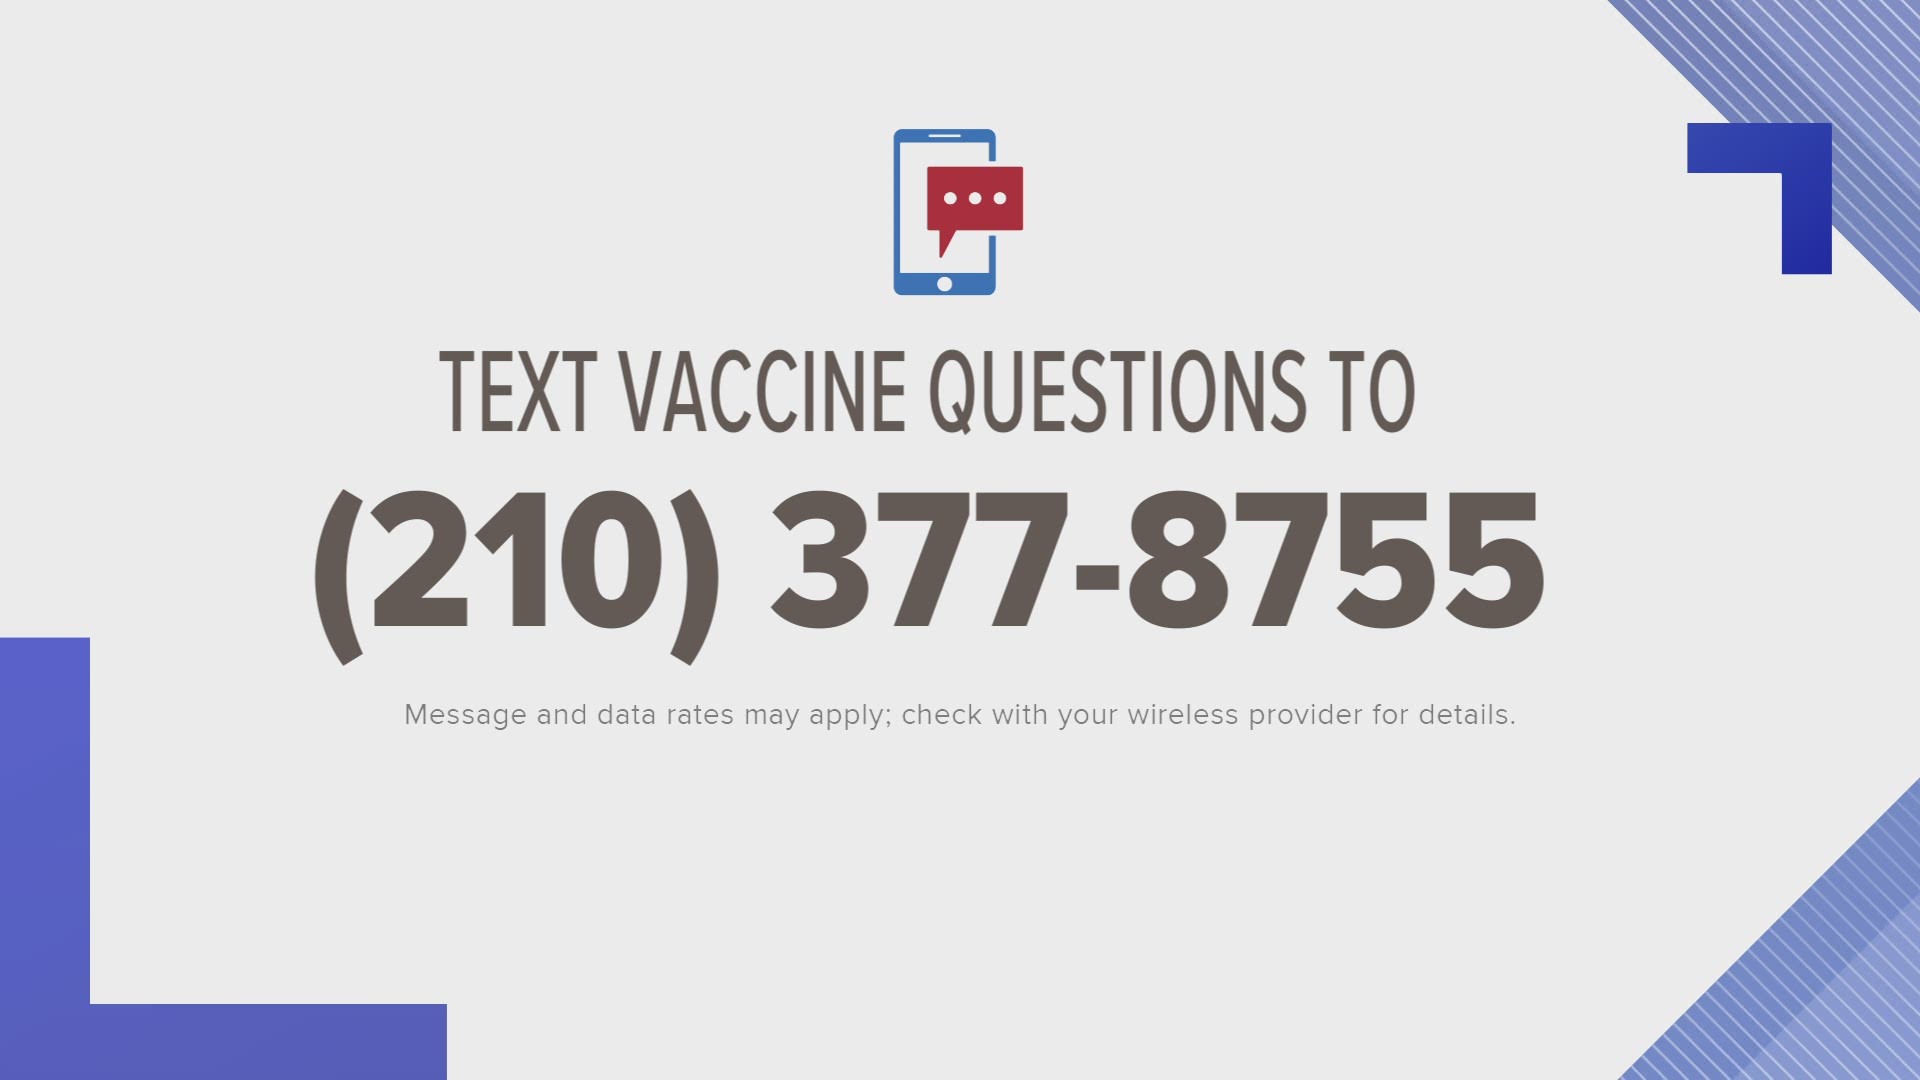 Text your vaccine questions to (210) 377-8755 and the KENS 5 Vaccine Team will do its best to get them answered.